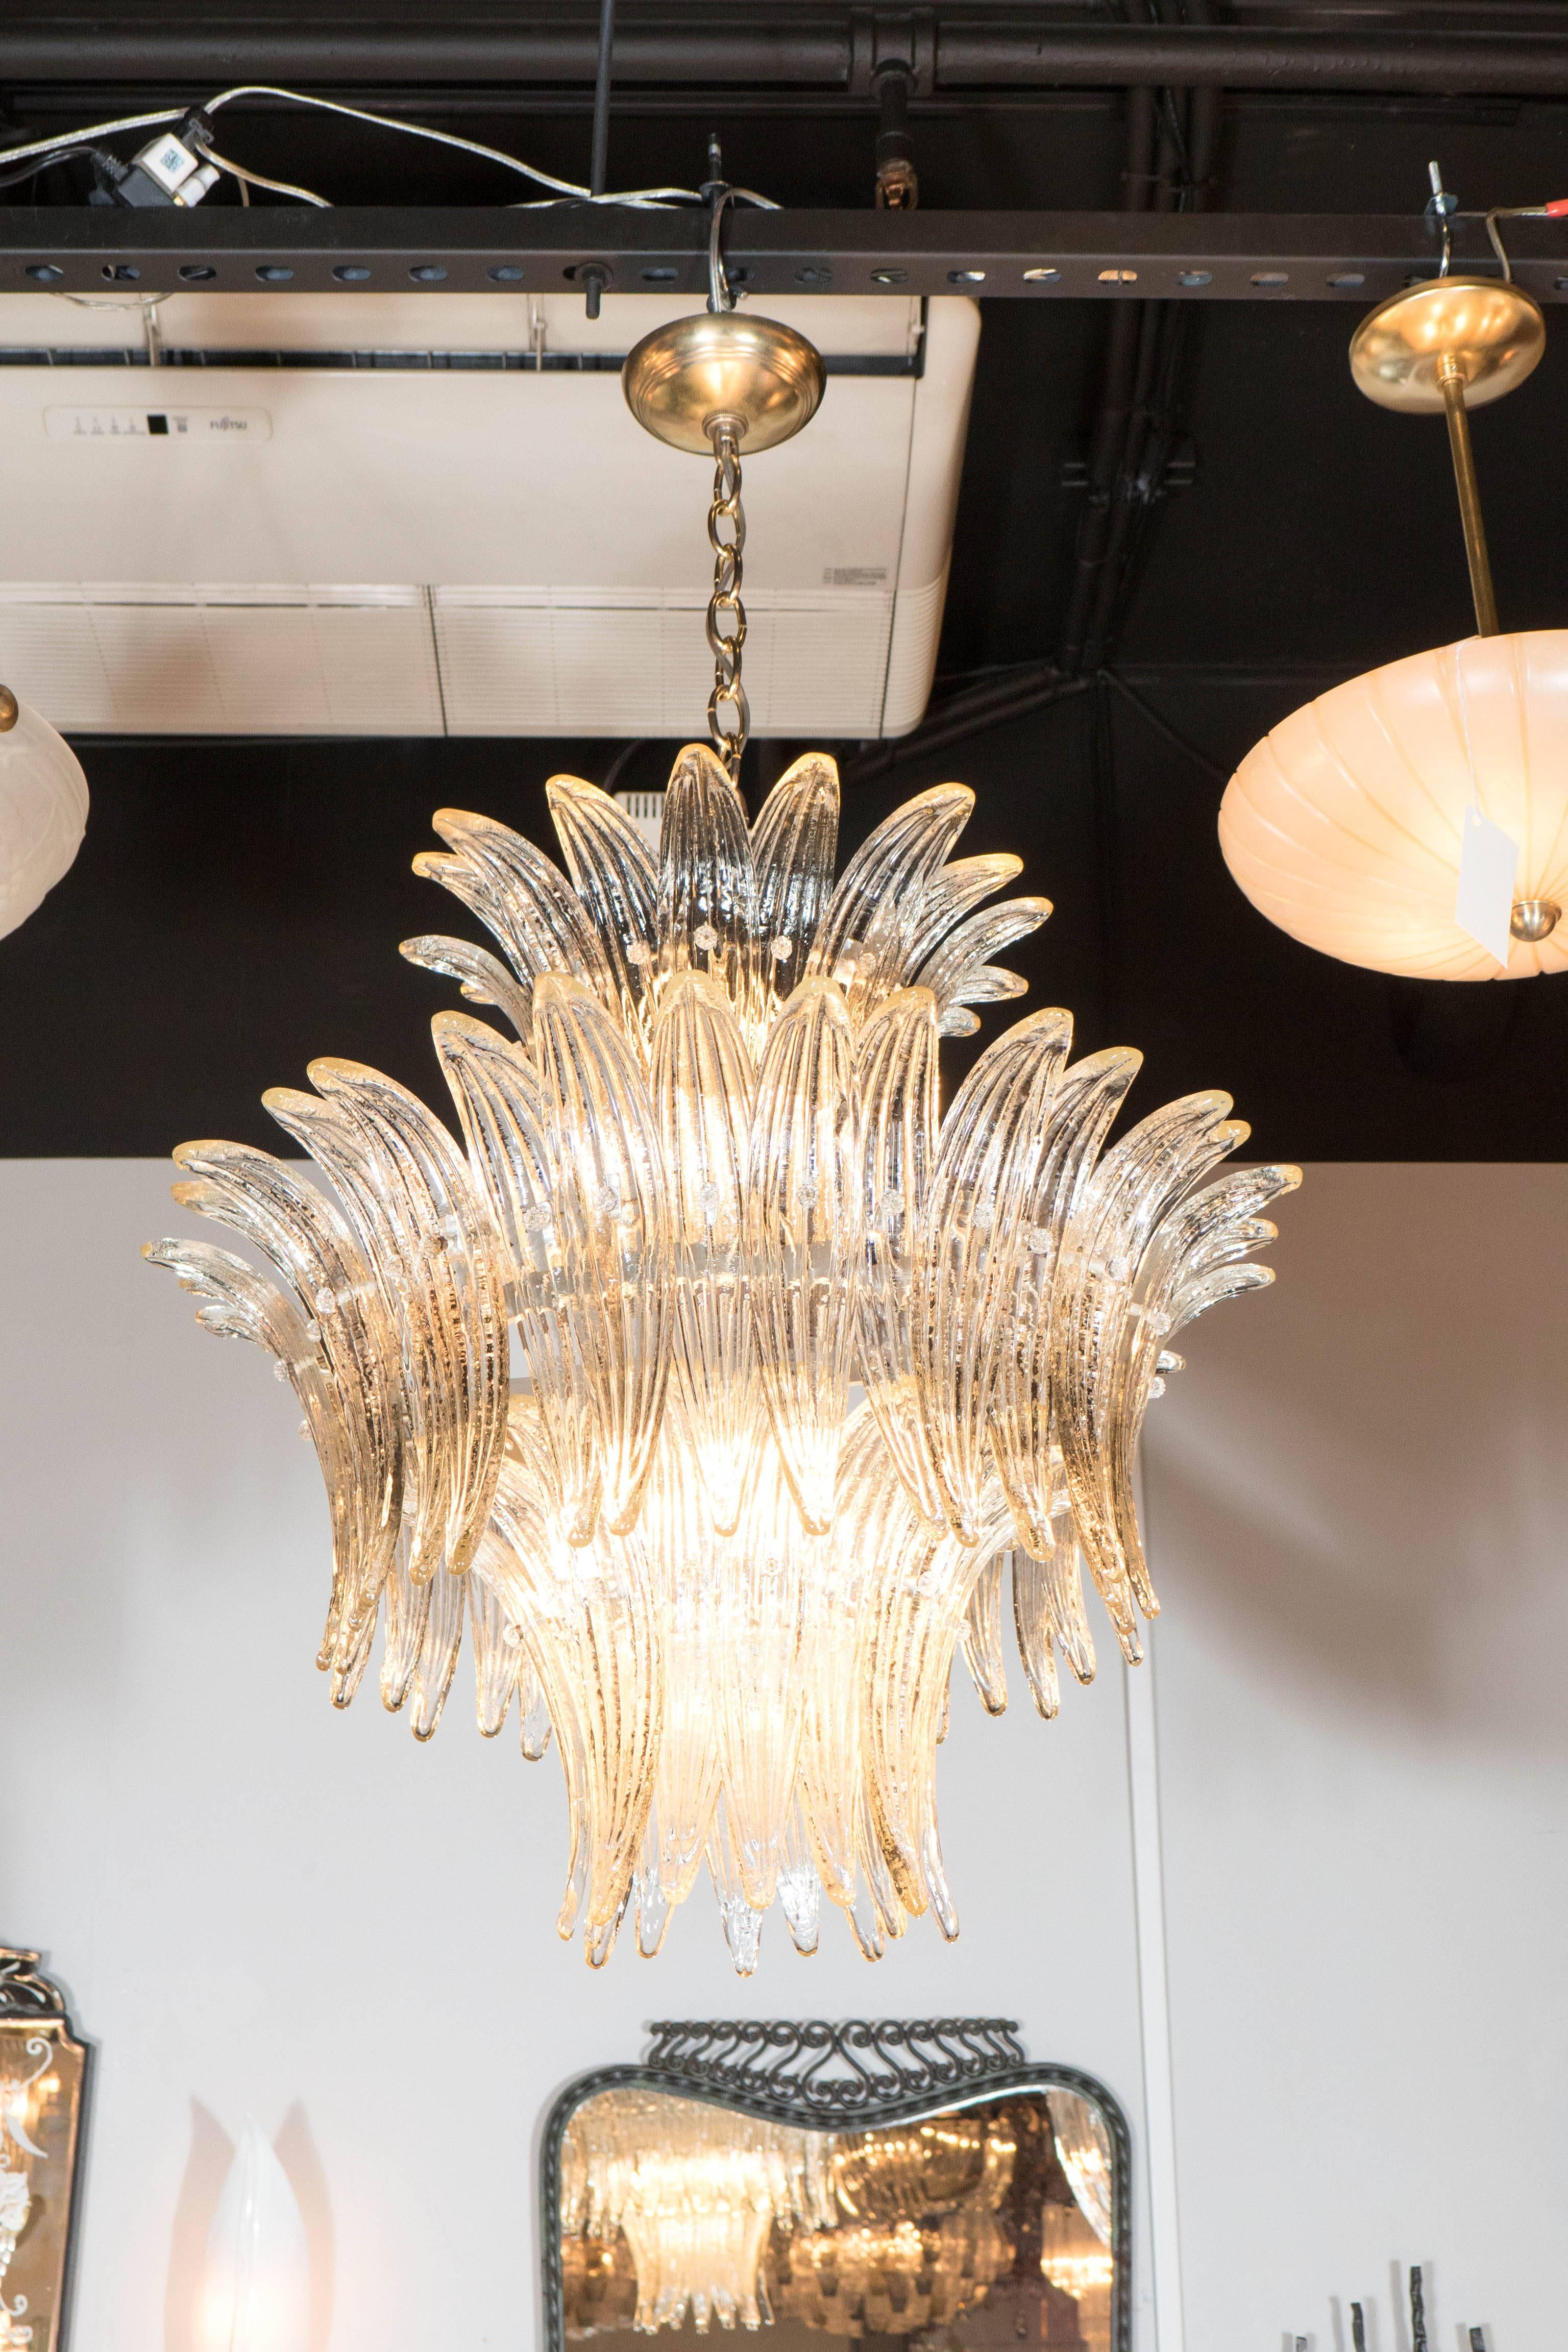 This exquisite three-tier Palma chandelier was realized in Murano, Italy- the island off the coast of Italy renowned for centuries for its superlative glass production. It offers an abundance of individually hung palm frond shades with a subtle